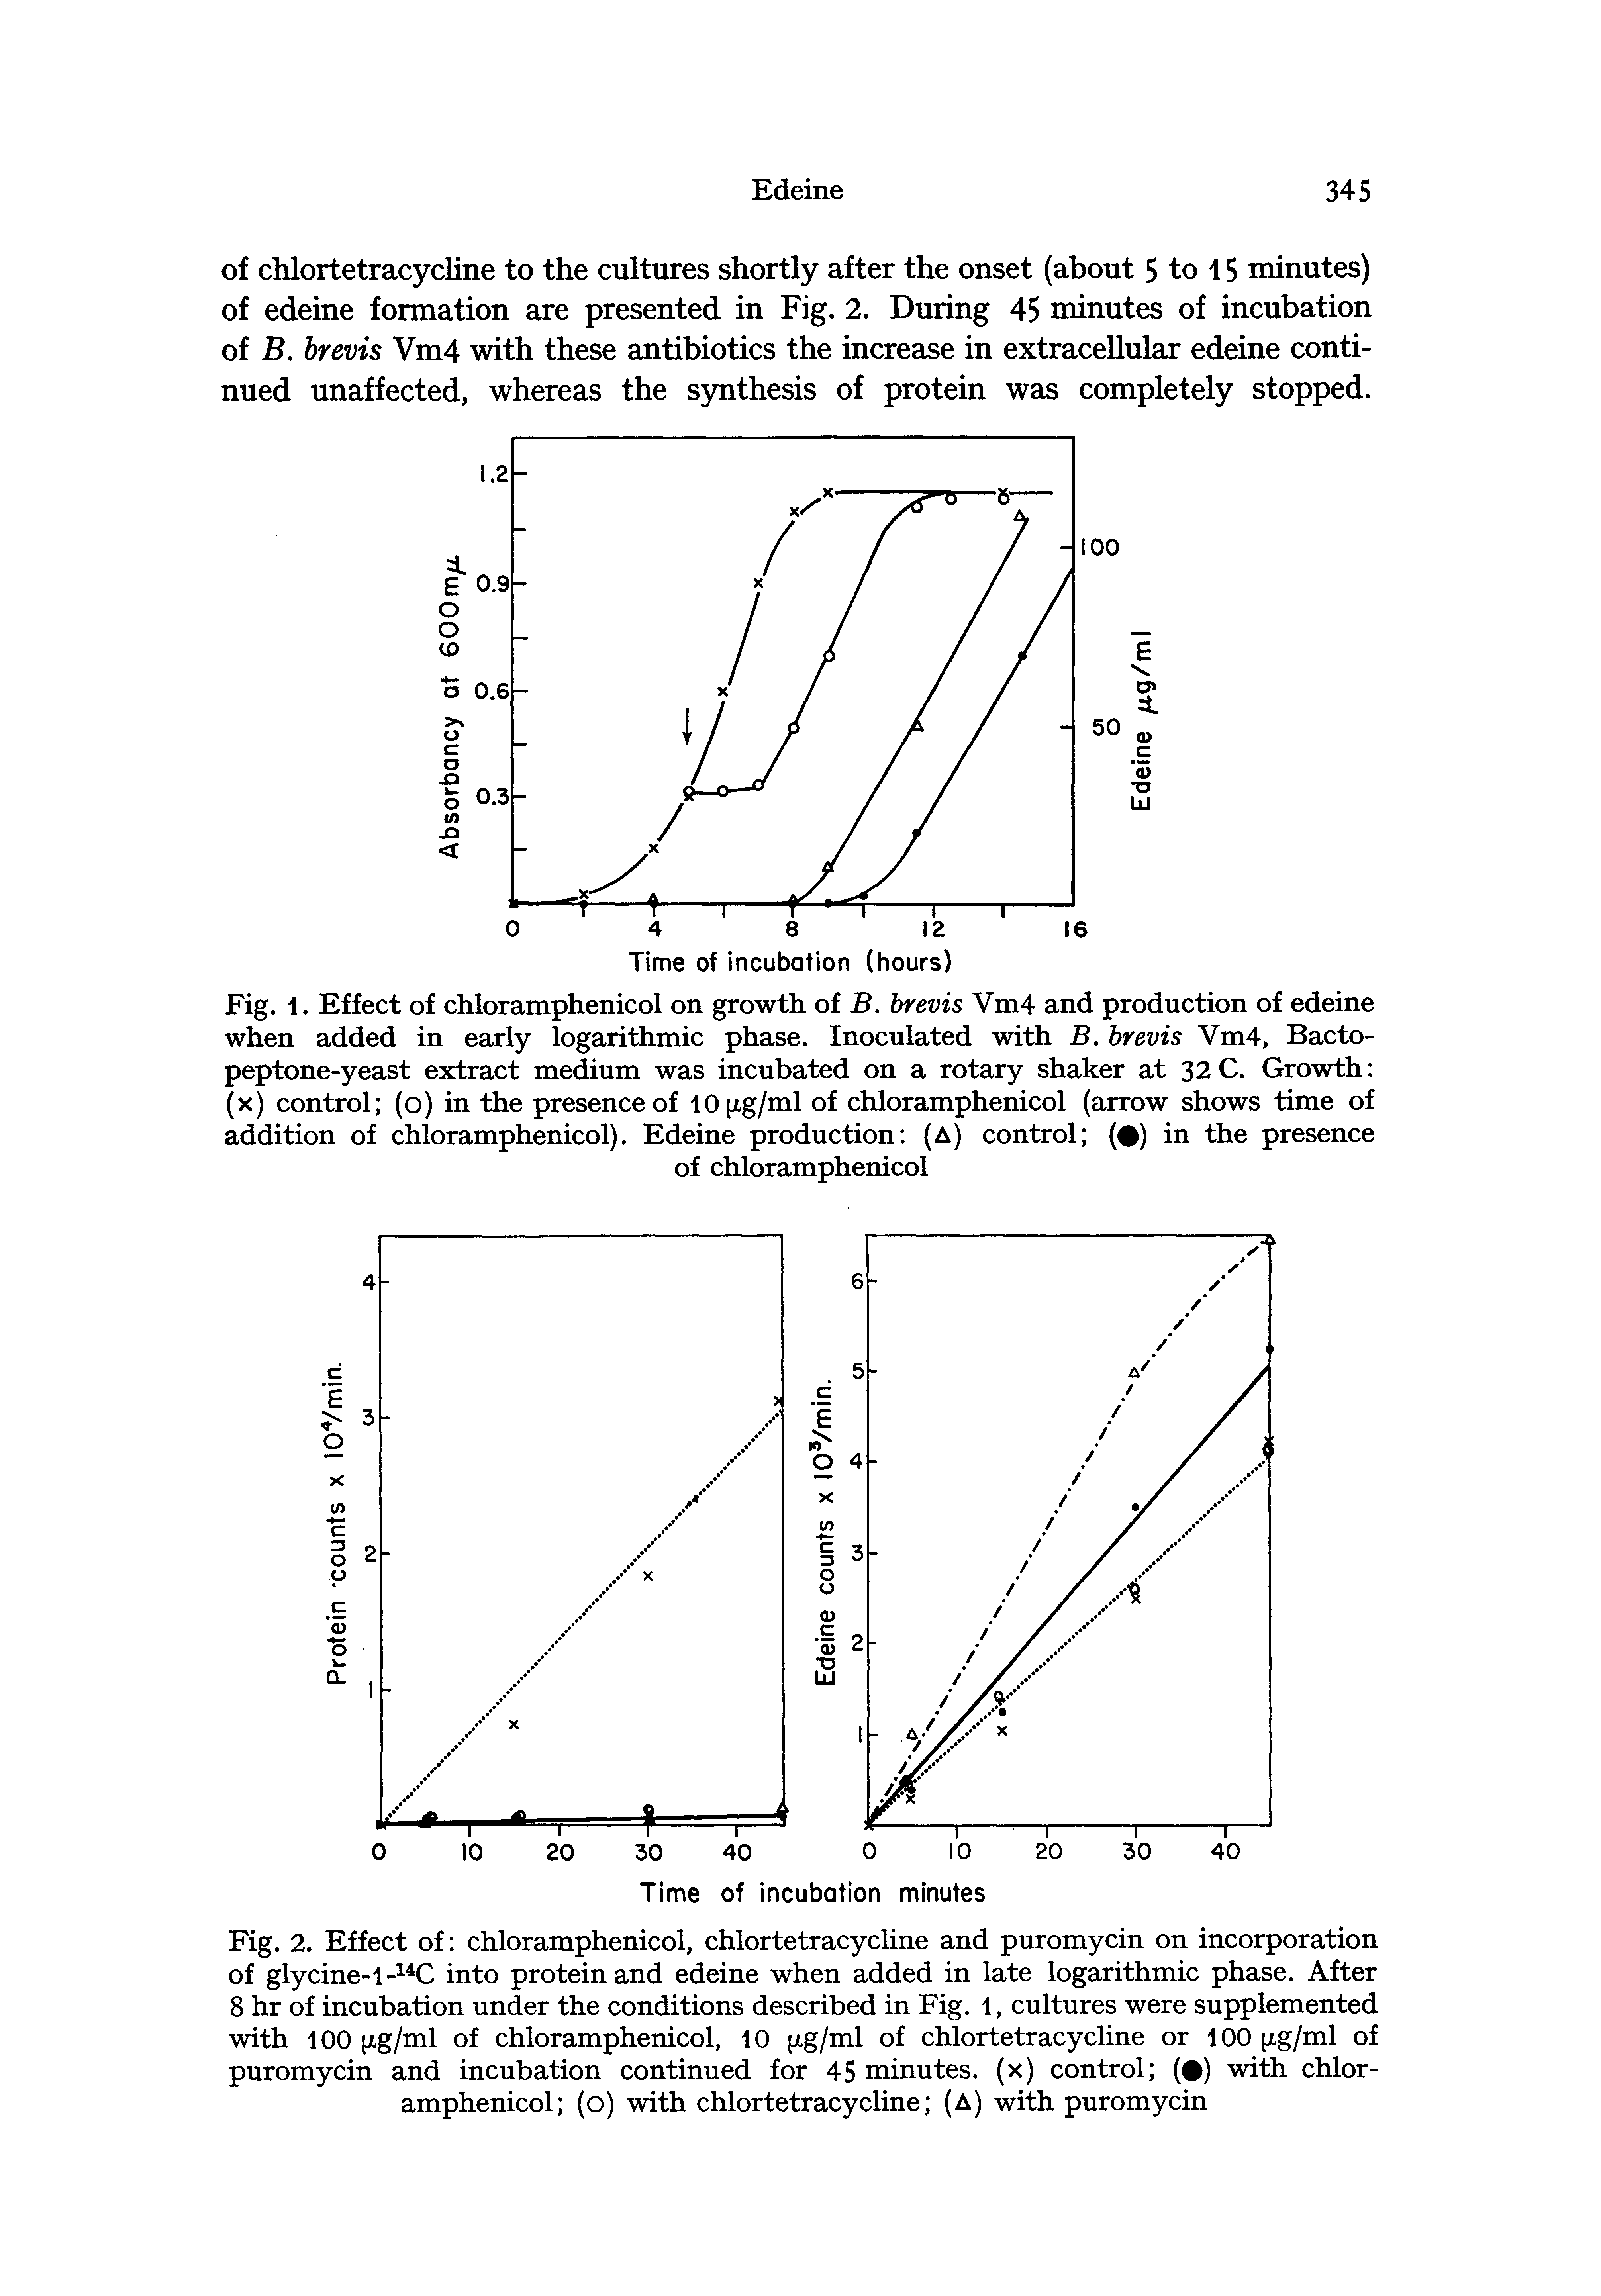 Fig. 2. Effect of chloramphenicol, chlortetracycline and puromycin on incorporation of glycine-l- C into protein and edeine when added in late logarithmic phase. After 8 hr of incubation under the conditions described in Fig. 1, cultures were supplemented with 100 (xg/ml of chloramphenicol, 10 xg/ml of chlortetracycline or 100 xg/ml of puromycin and incubation continued for 45 minutes, (x) control ( ) with chloramphenicol (o) with chlortetracycline (A) with puromycin...